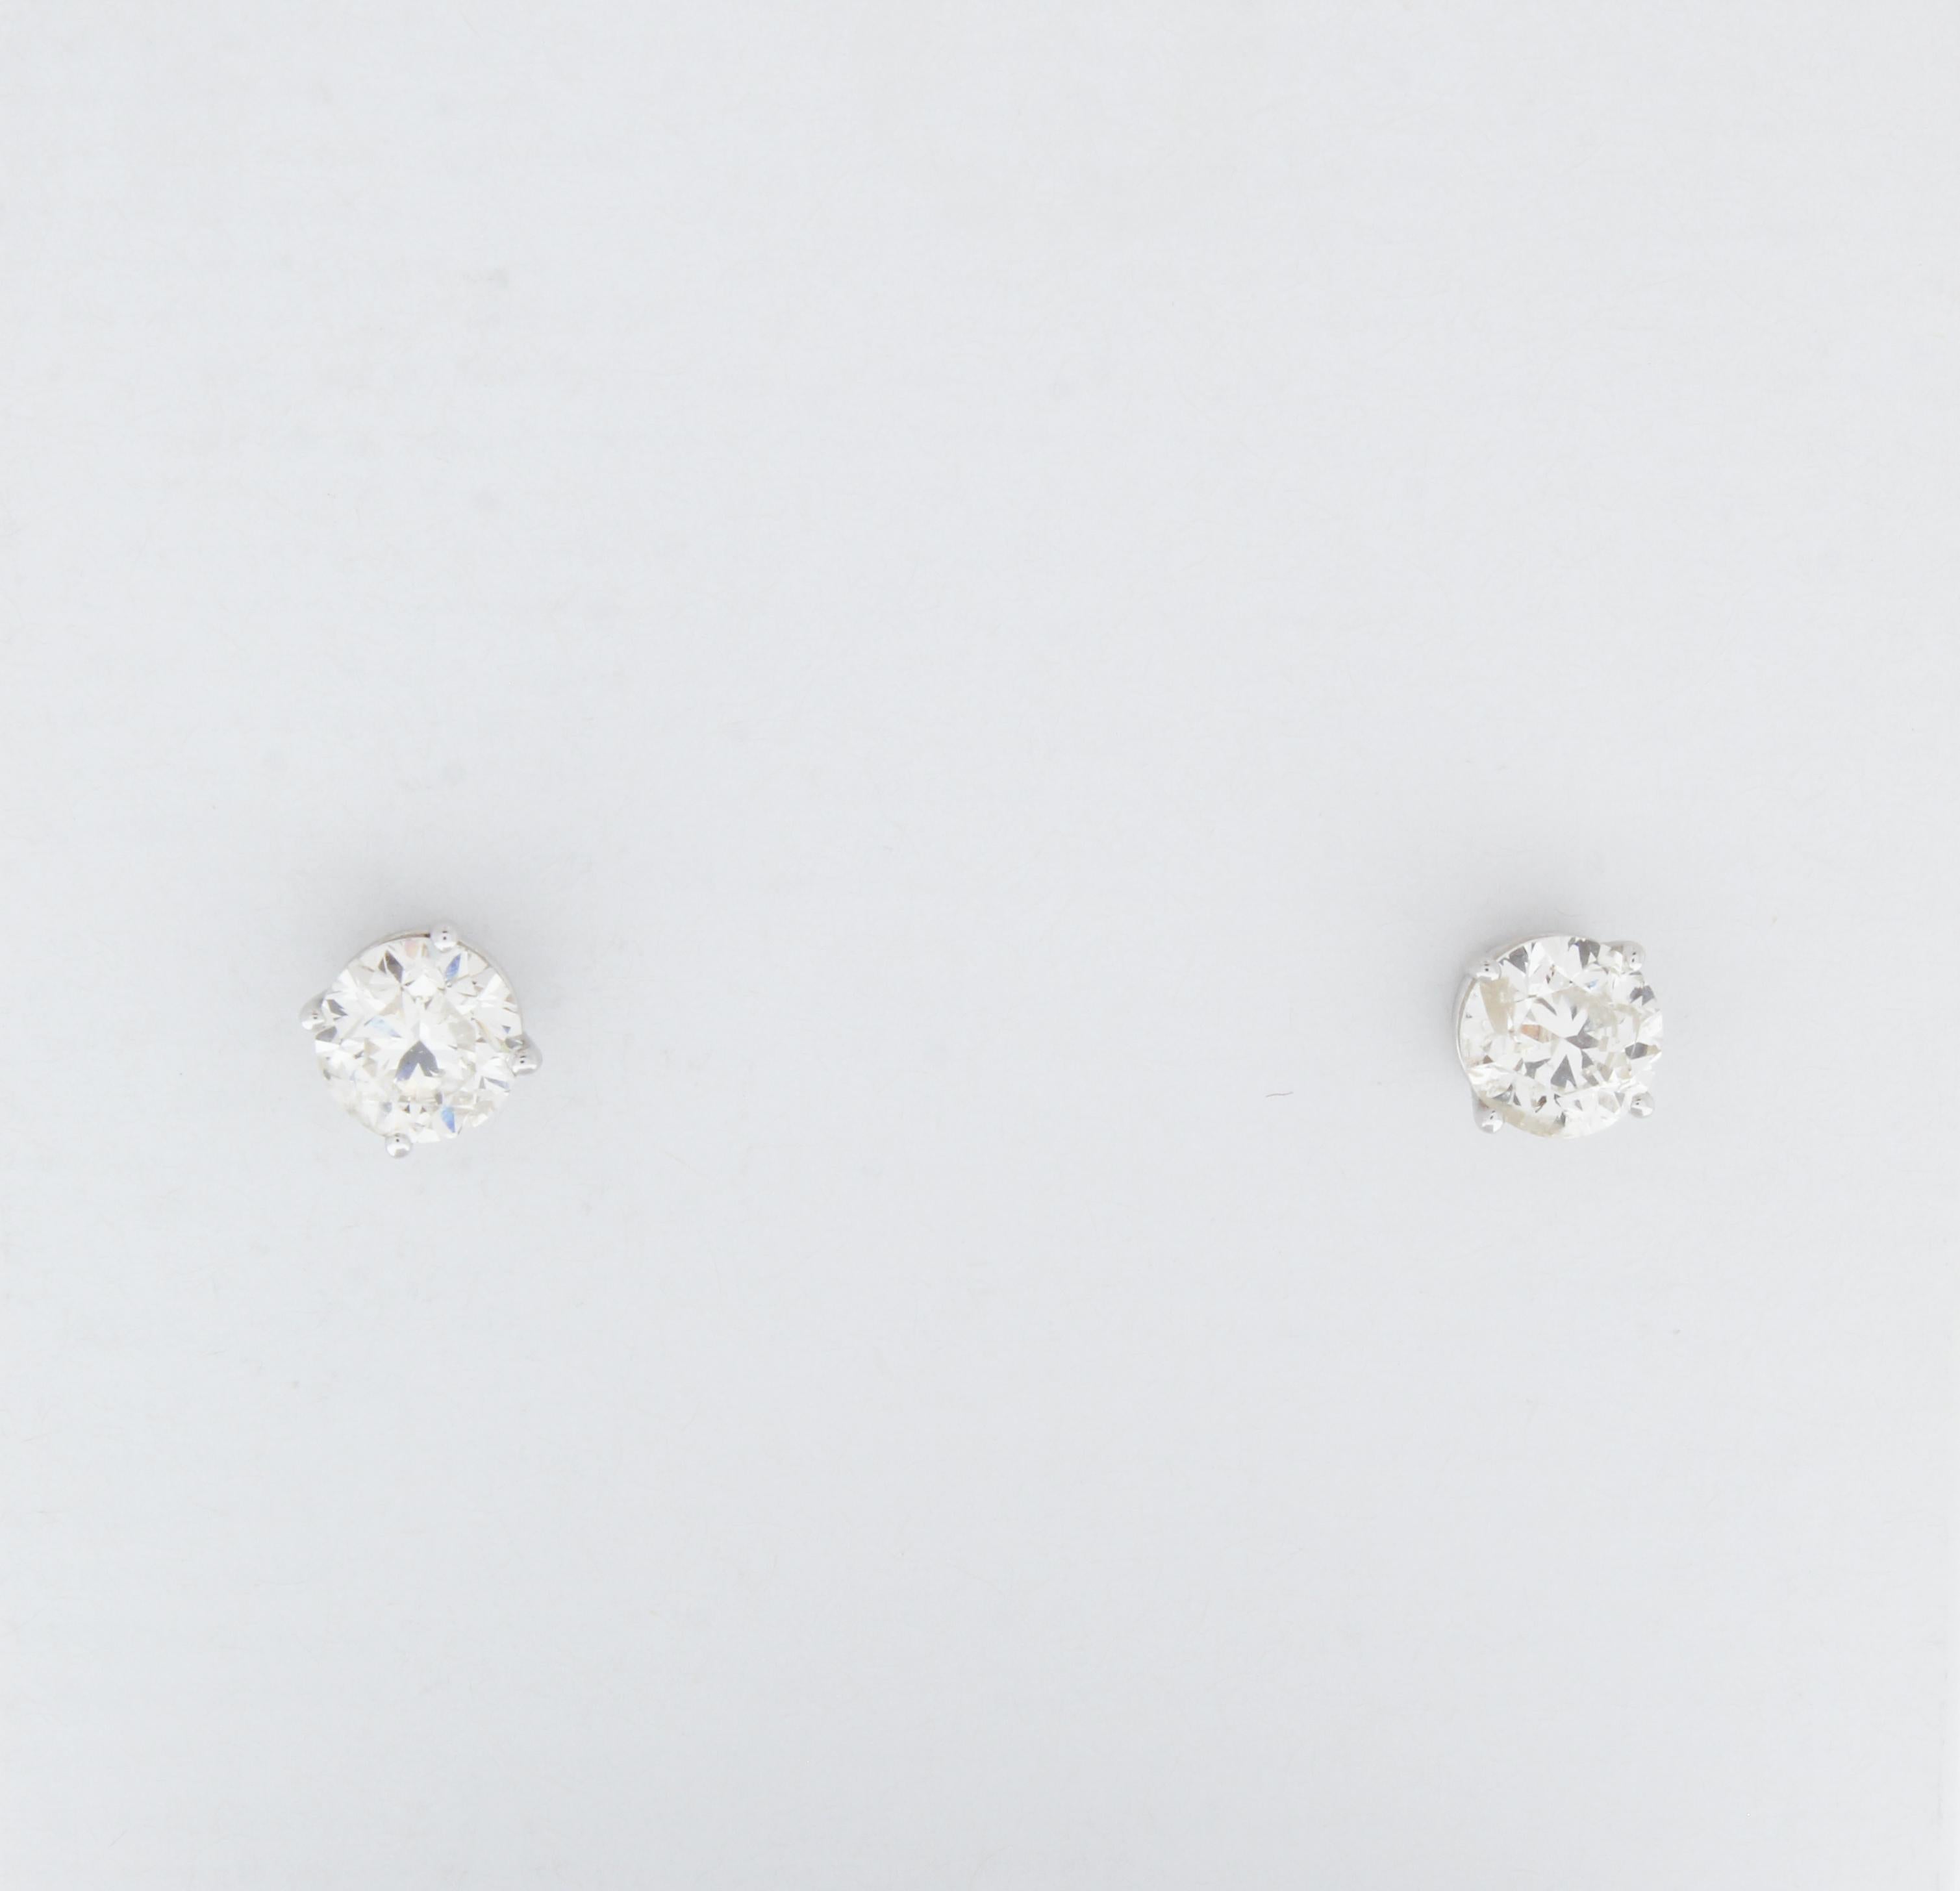 Contemporary 2.00 Carat Total Weight Diamond Stud Earrings in 14k White Gold For Sale